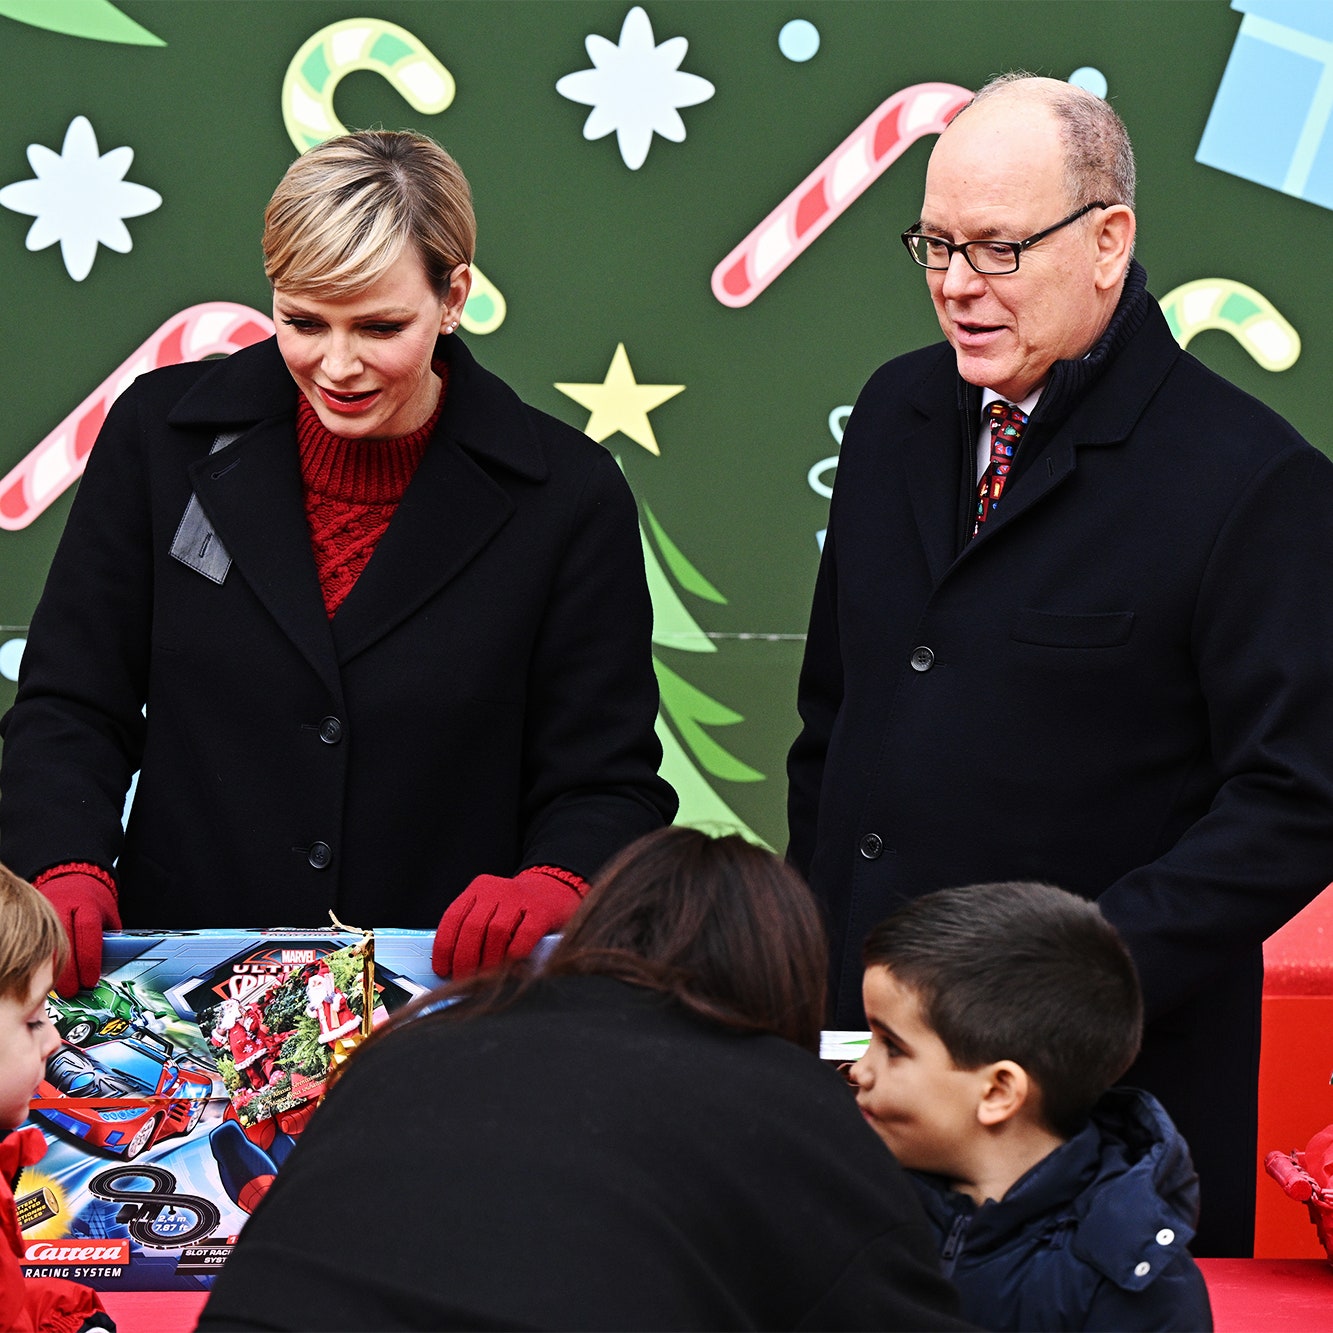 Prince Albert and Princess Charlene of Monaco Welcome Children to Palace Christmas Party